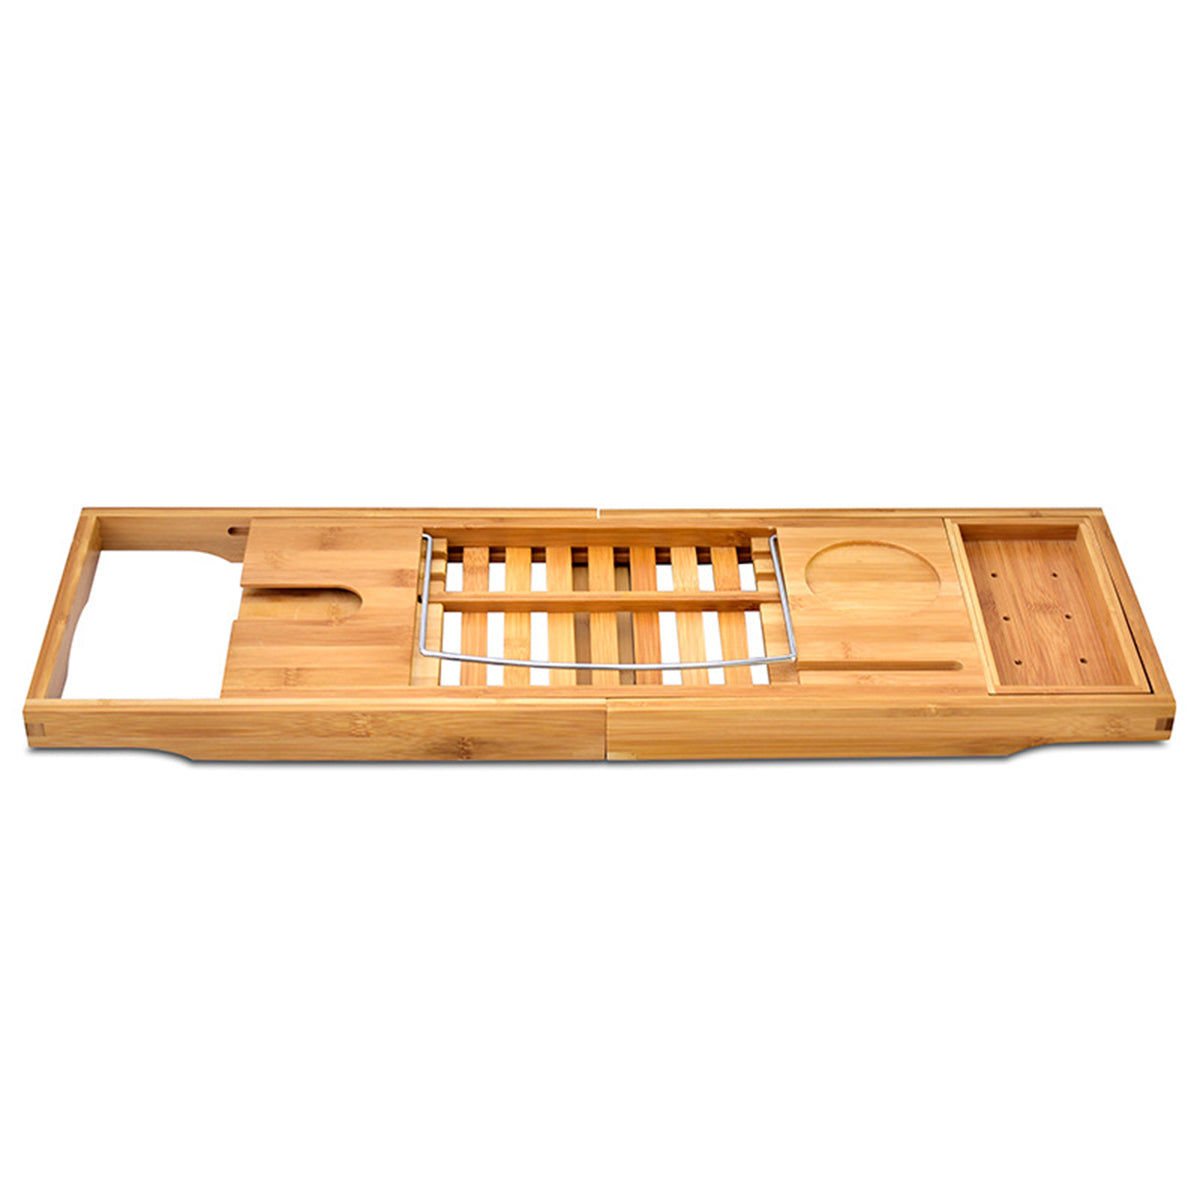 Creative Bamboo Bathtub Tray with Extending Sides Reading Rack Tablet Holder Cellphone Tray and Wine Glass Holder - Viniamore